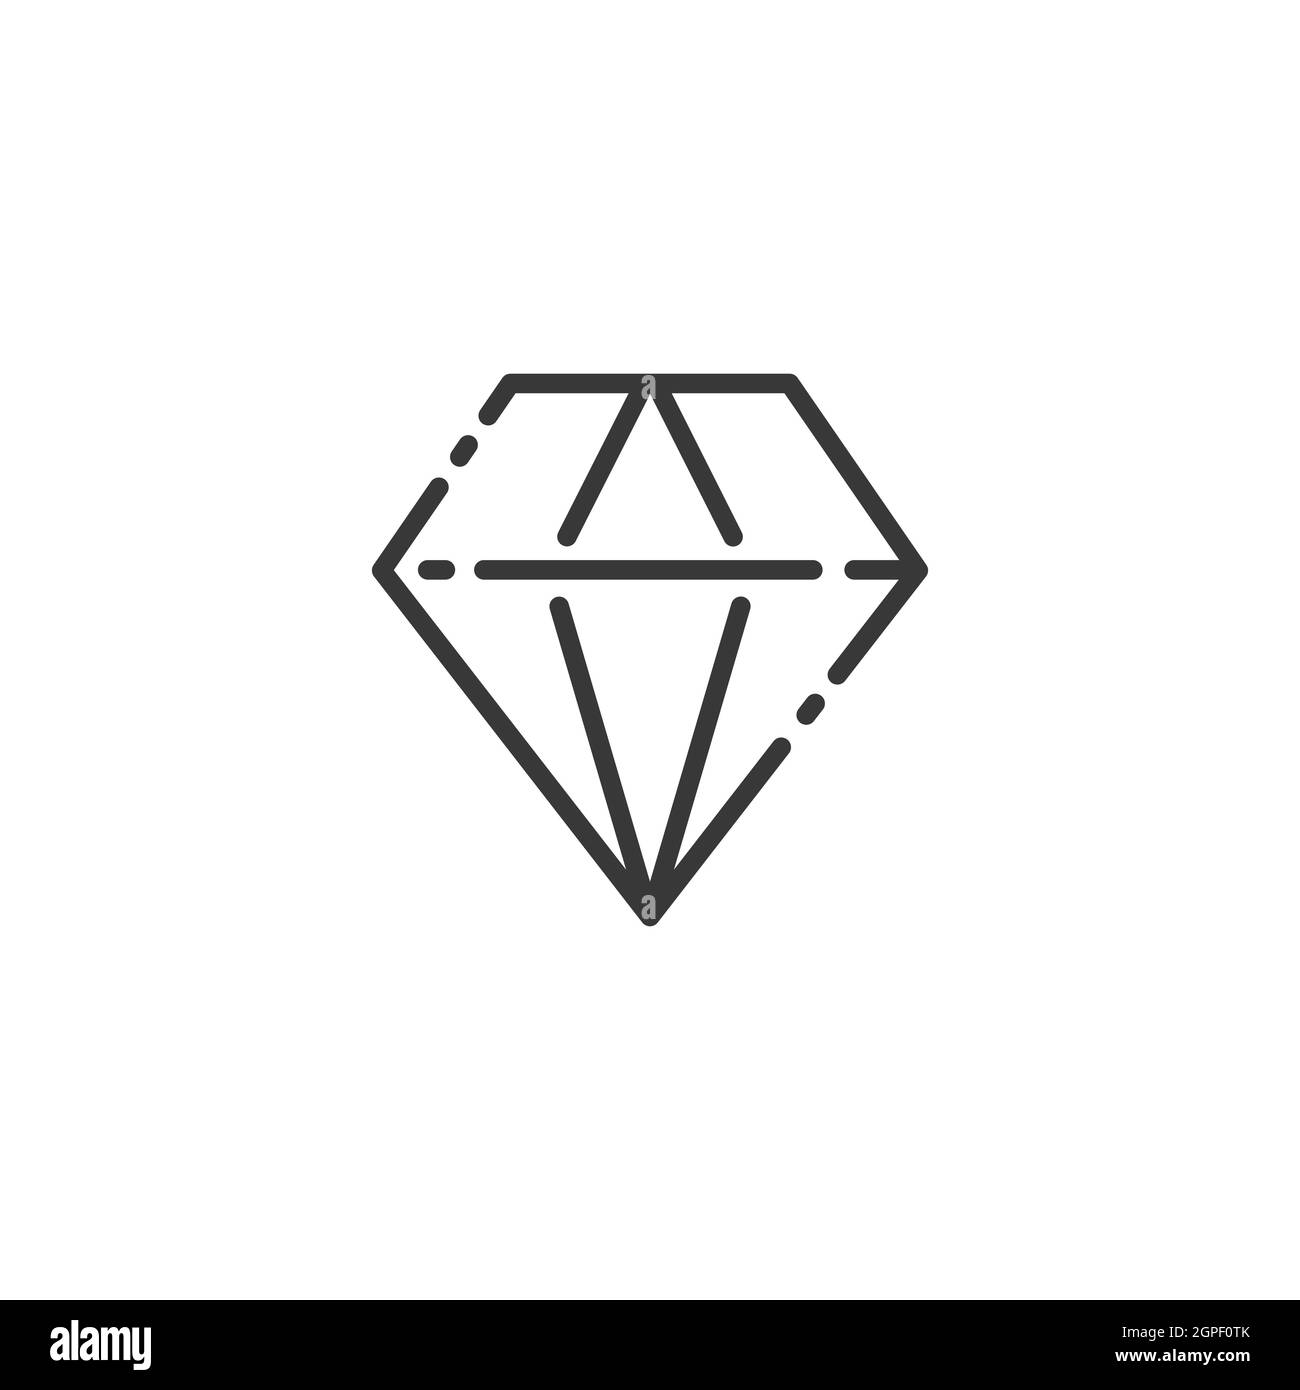 Diamond thin line icon. Jewelry and luxury. Outline commerce vector illustration Stock Vector